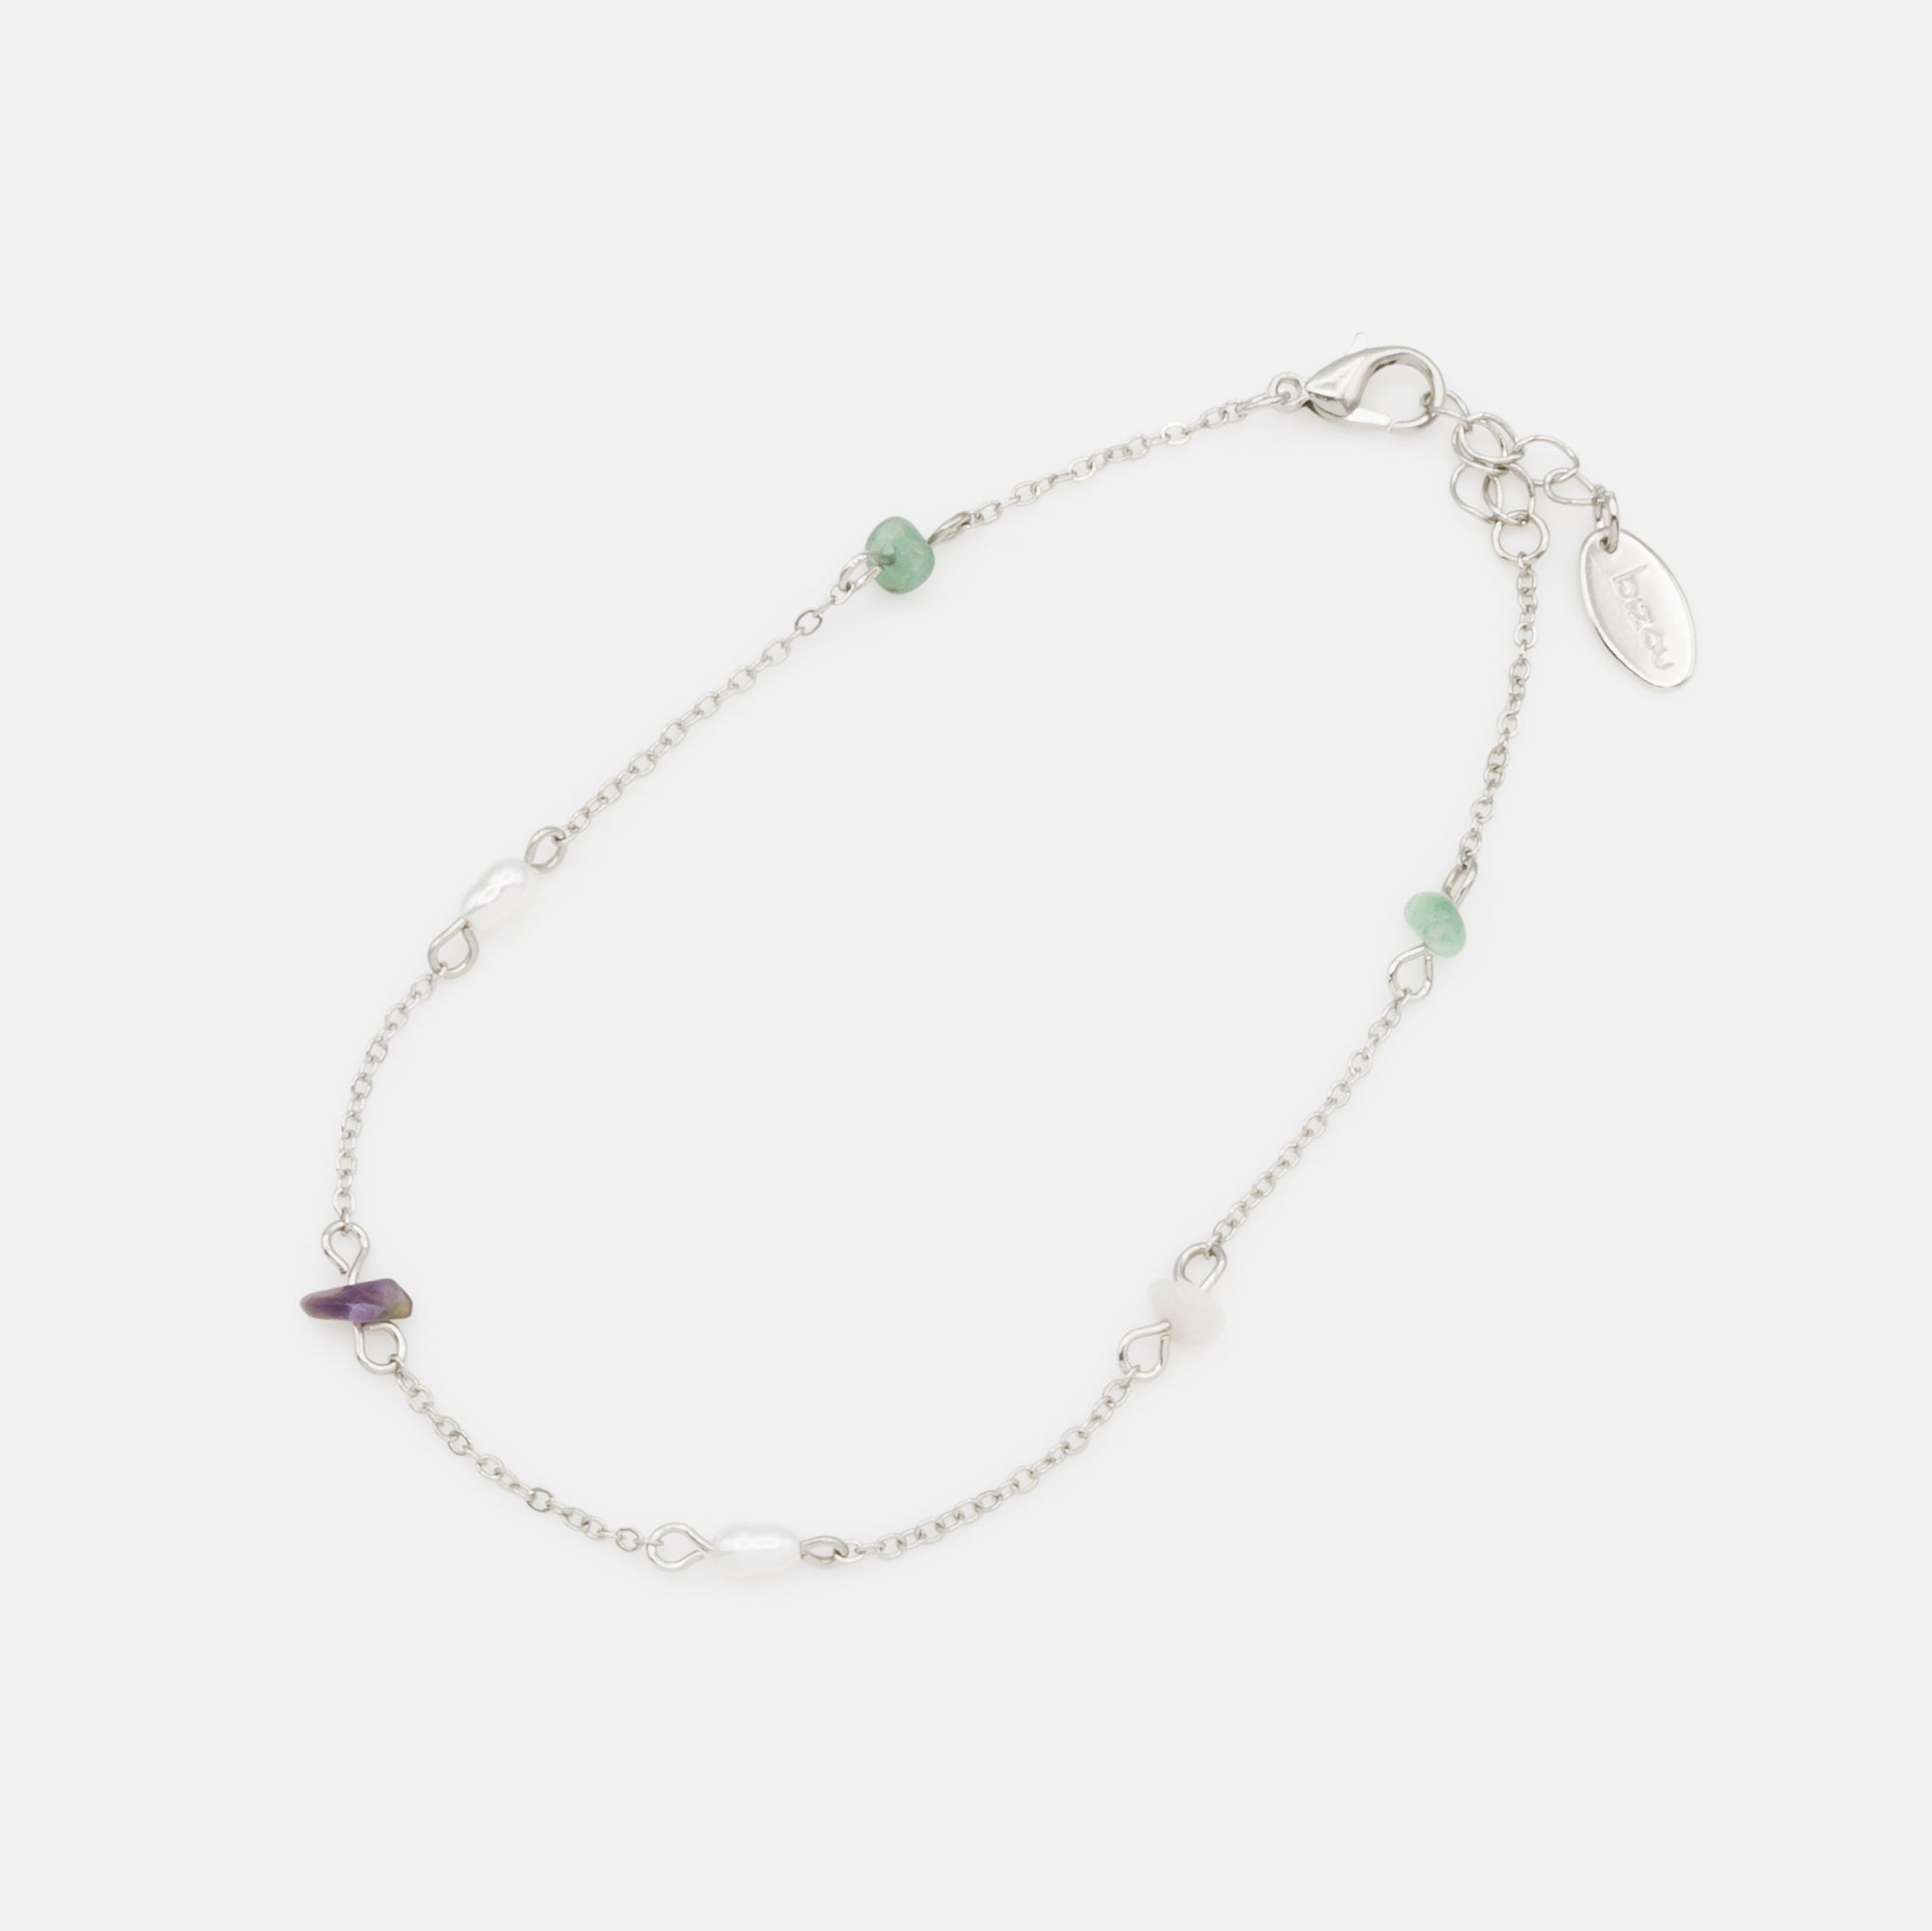 Silver anklet with pearls and colored stones